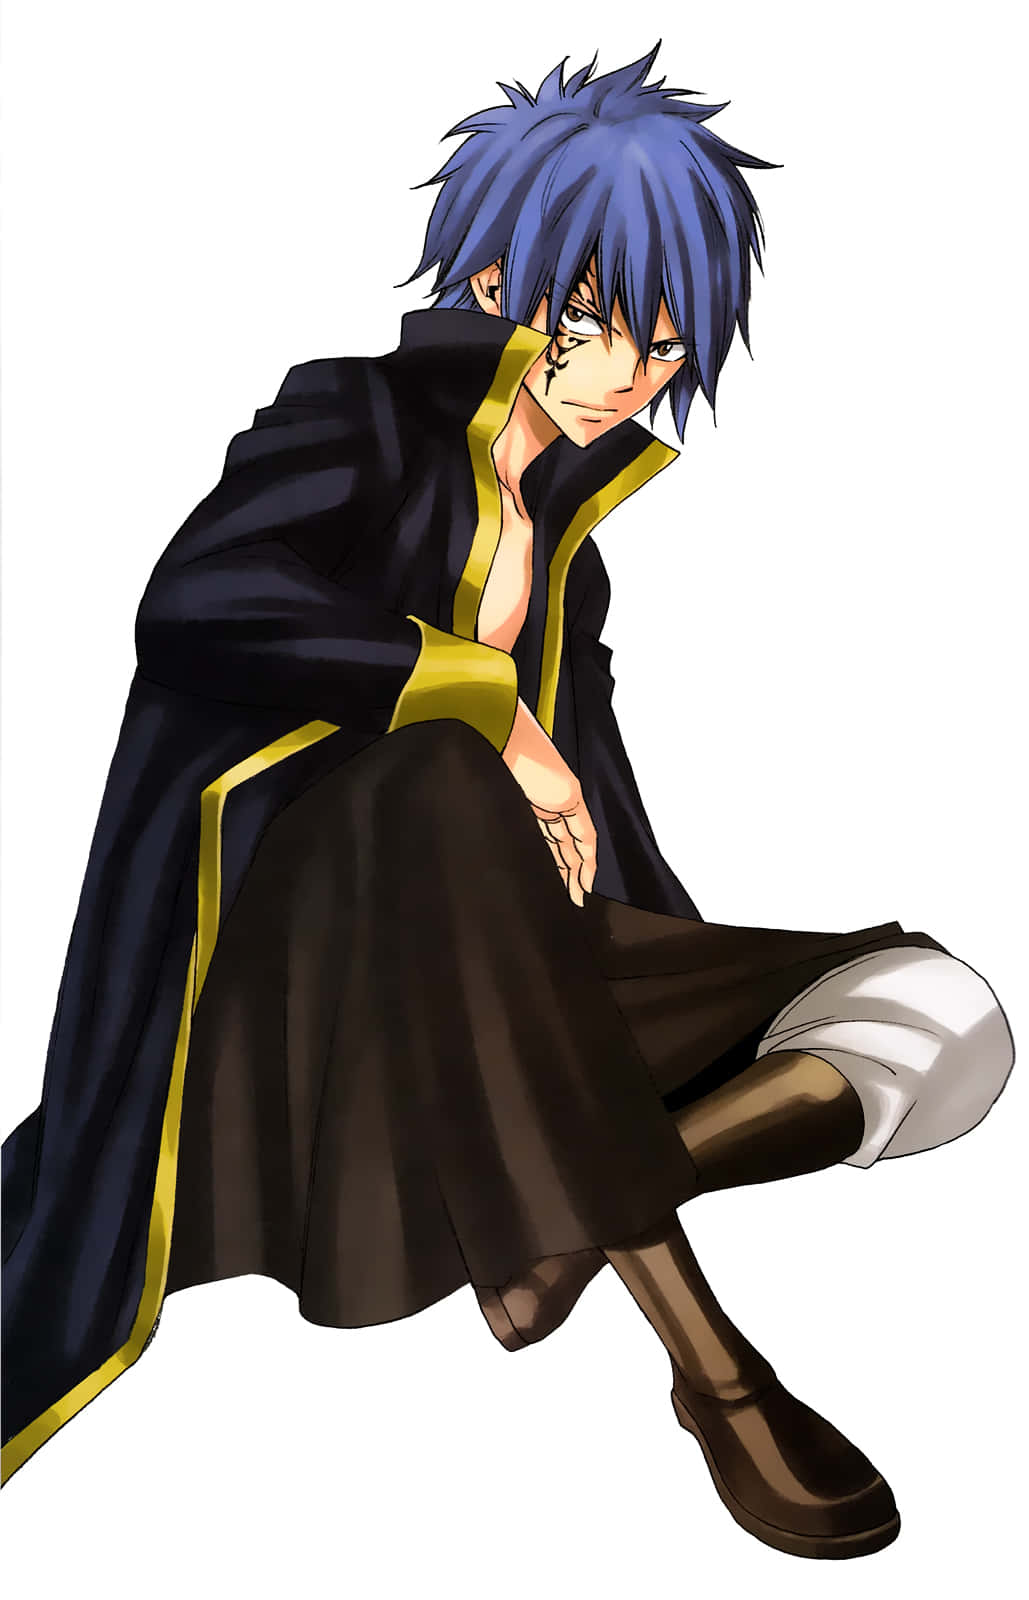 Jellal Fernandes, the enigmatic and powerful mage from the Fairy Tail series Wallpaper